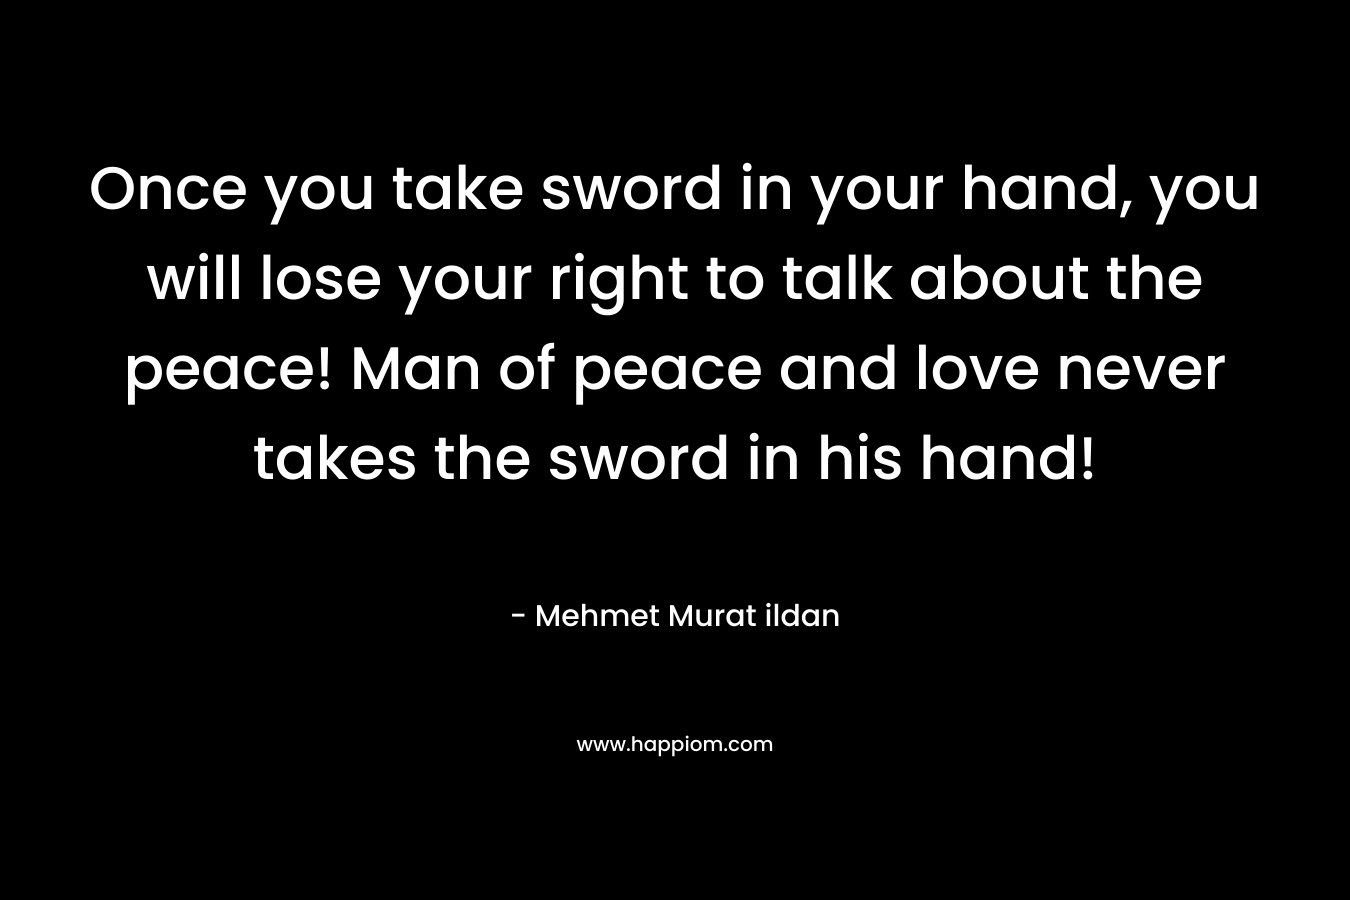 Once you take sword in your hand, you will lose your right to talk about the peace! Man of peace and love never takes the sword in his hand! – Mehmet Murat ildan